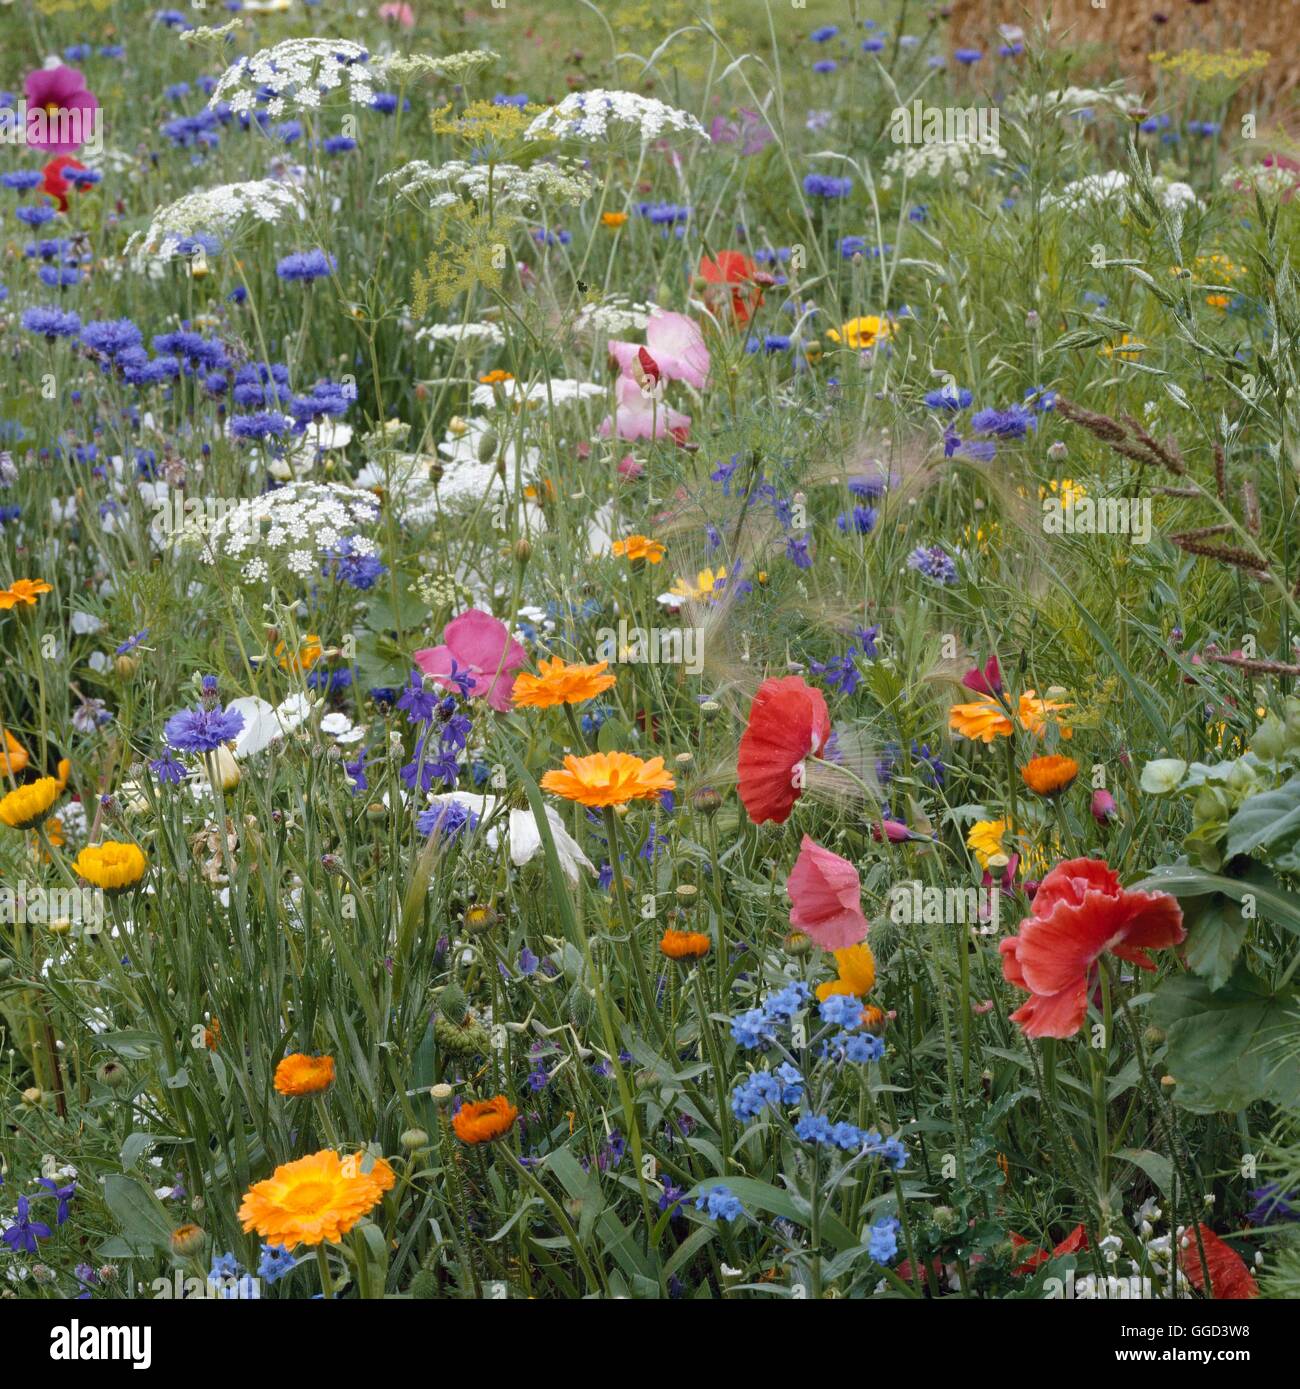 Annuals - Mixed - with Biennials and Grasses   ANN078384 Stock Photo